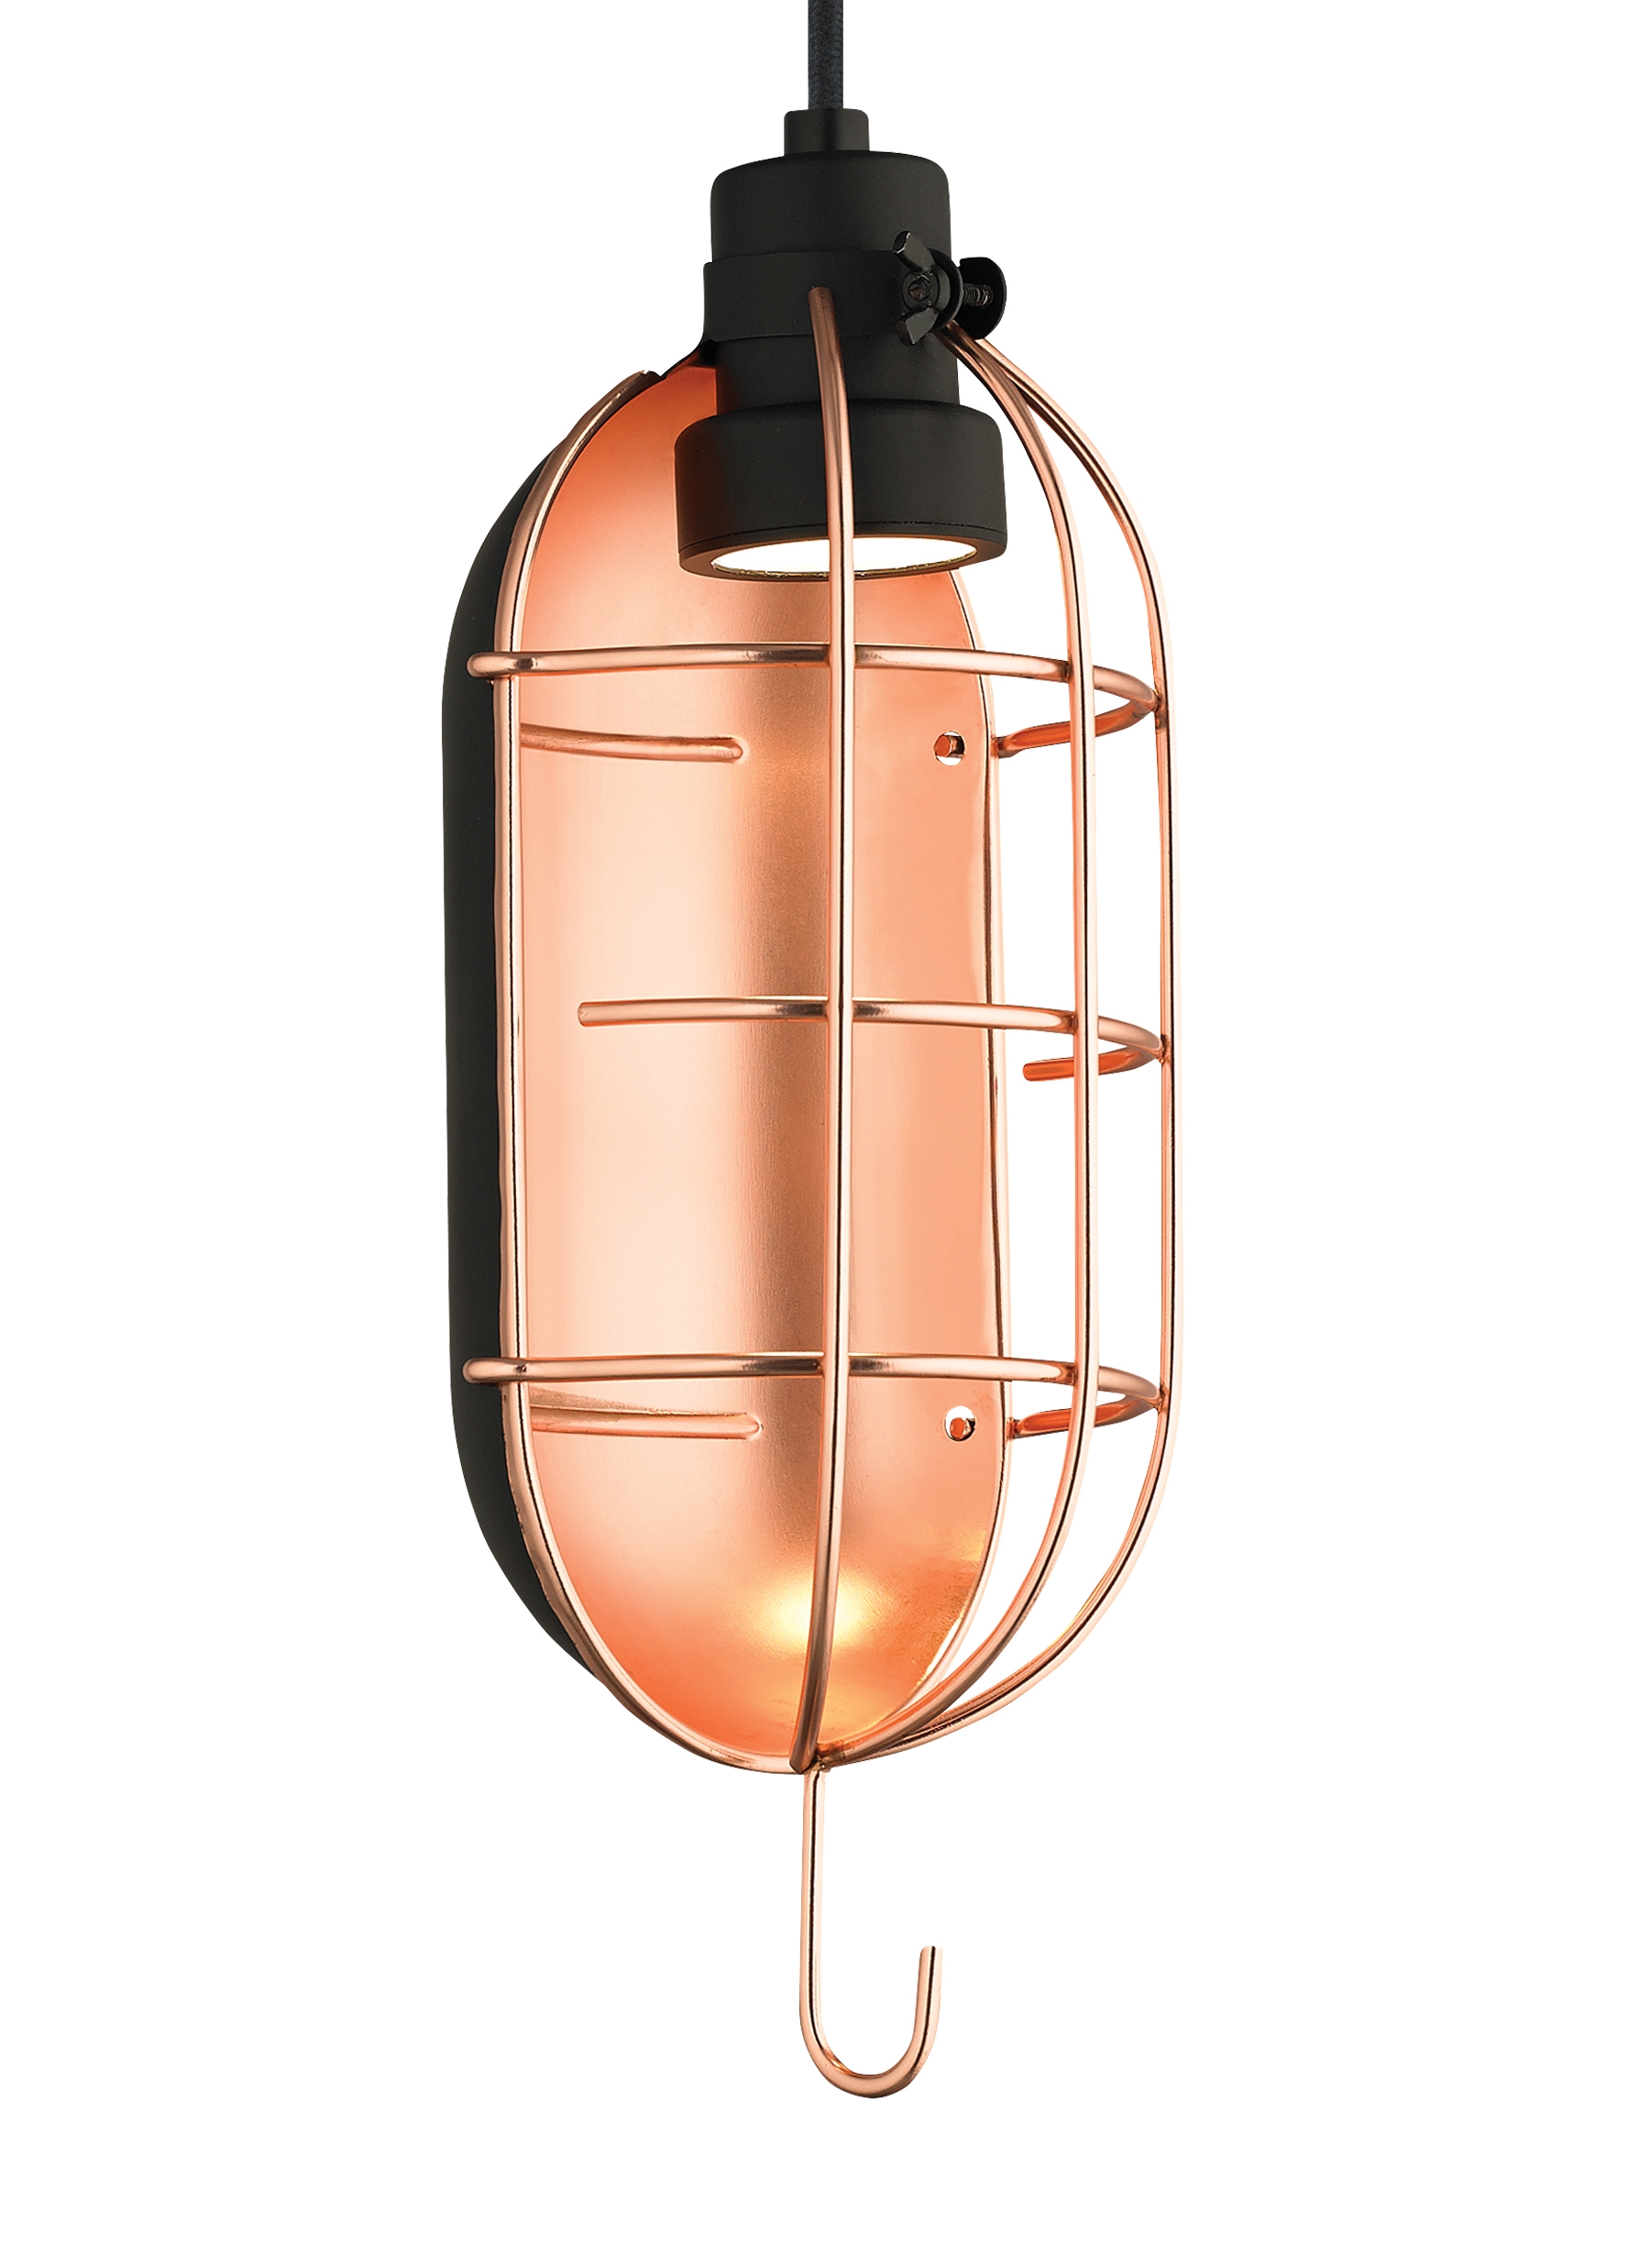 The new Mekanic line-voltage pendant by LBL Lighting